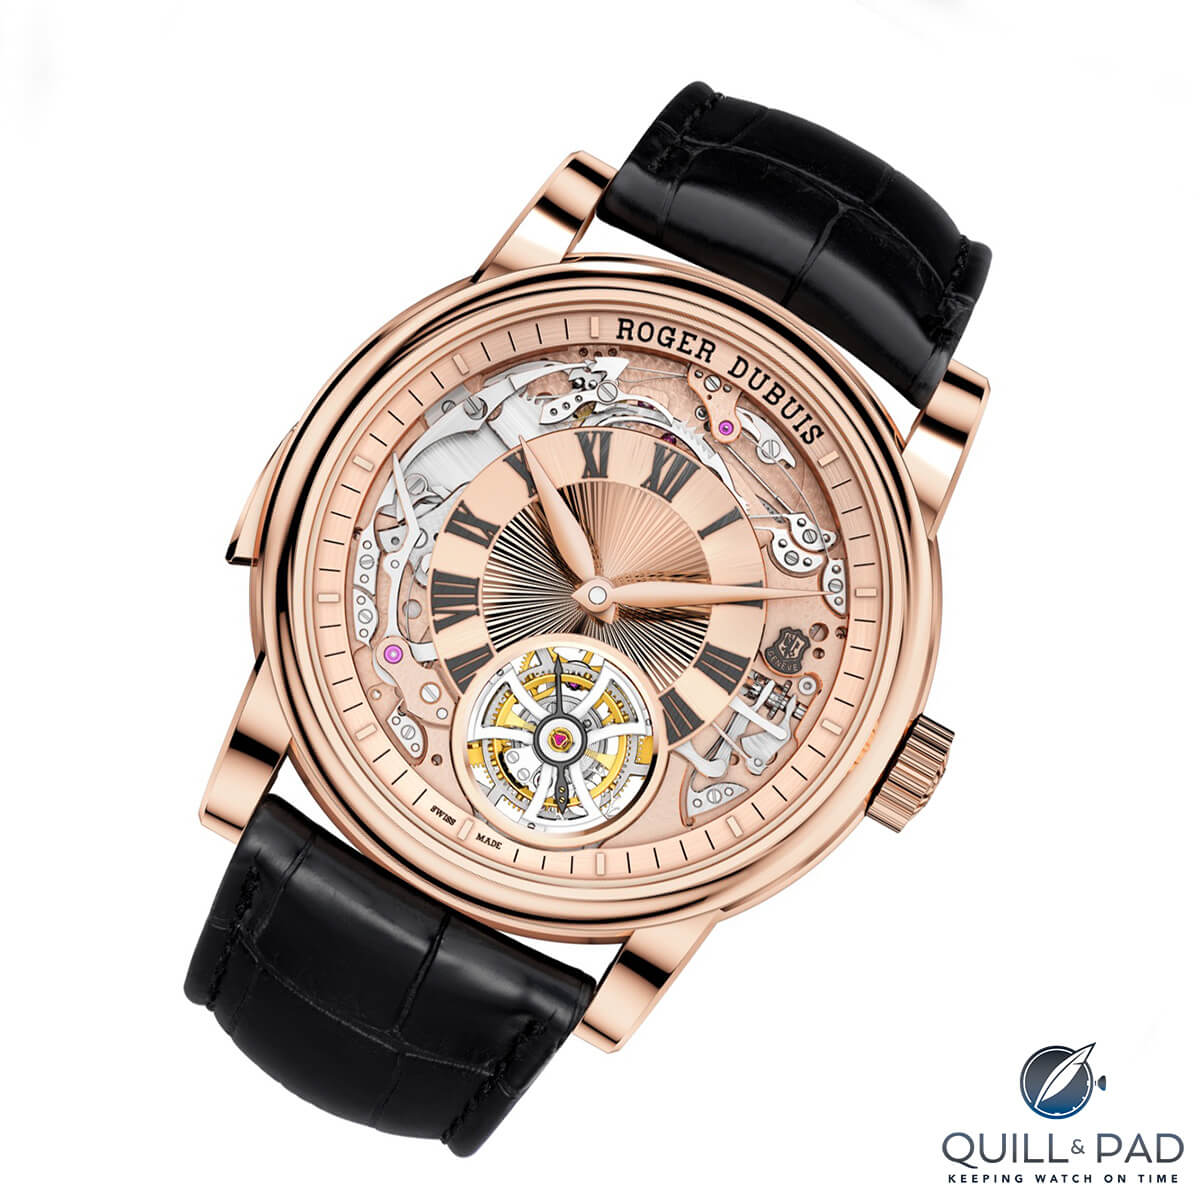 Roger Dubuis Hommage Minute Repeater Tourbillon Automatic